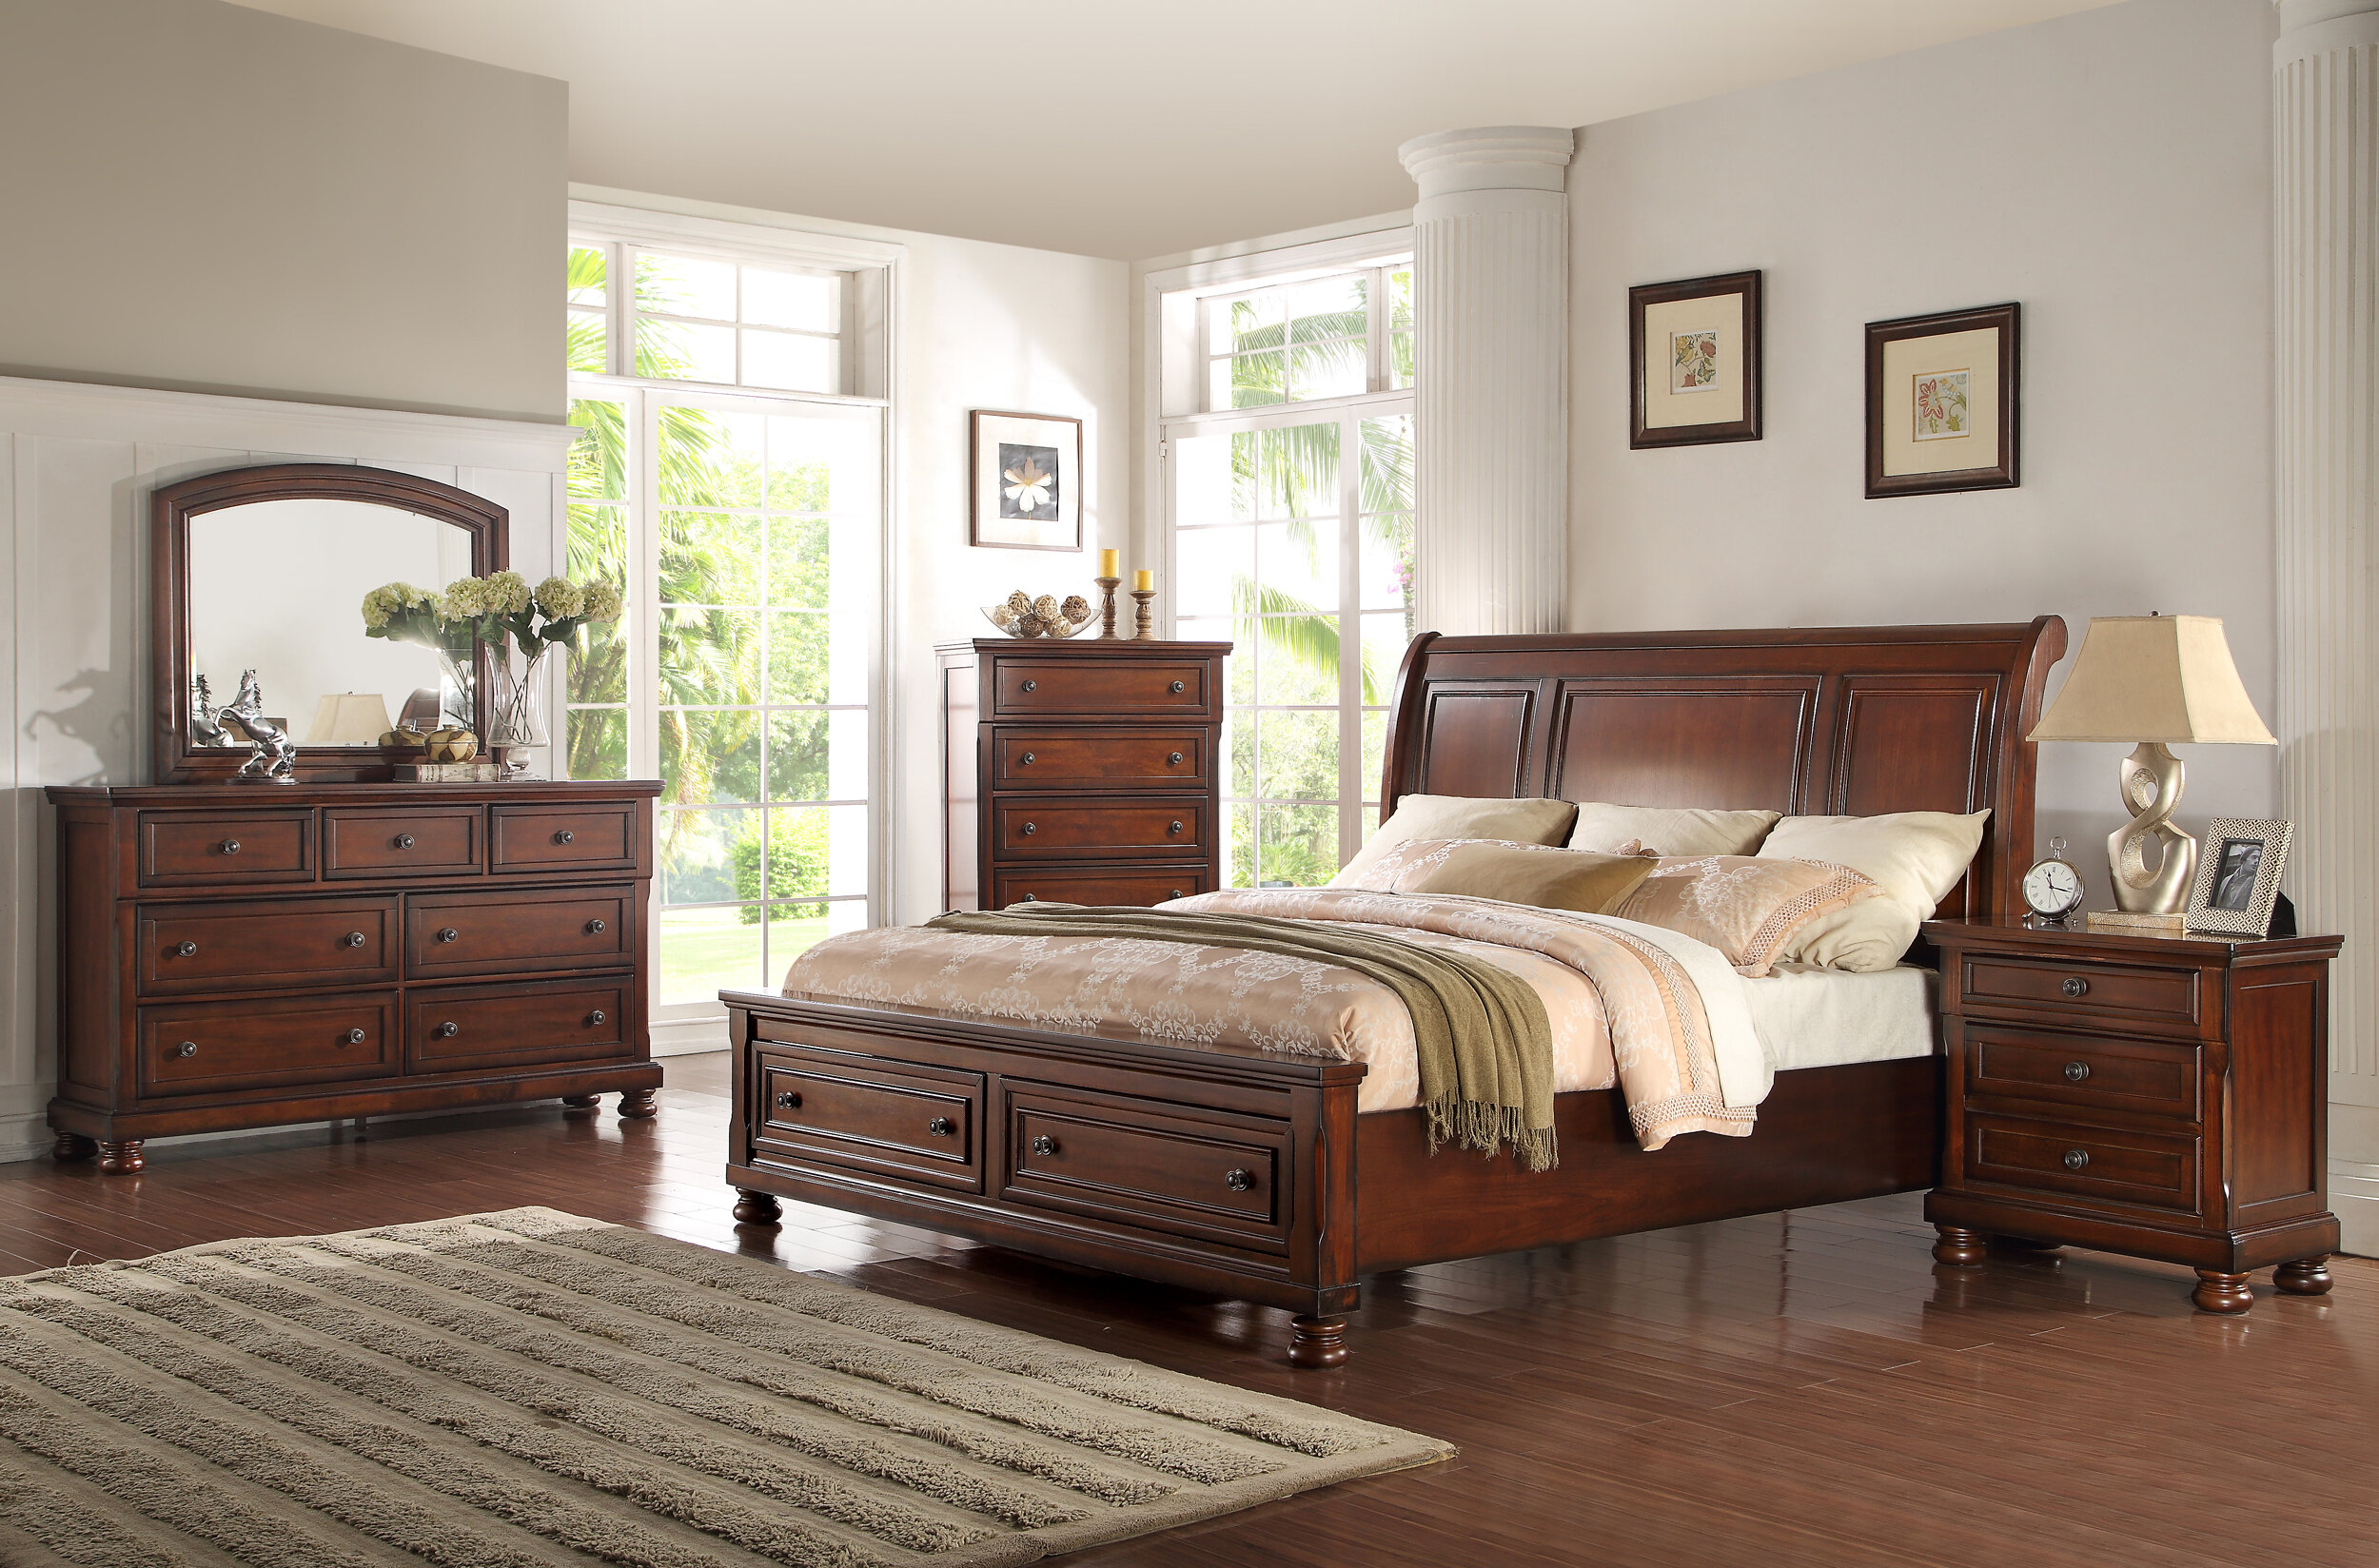 Darby Home Co Bedroom Sets You Ll Love In 2021 Wayfair